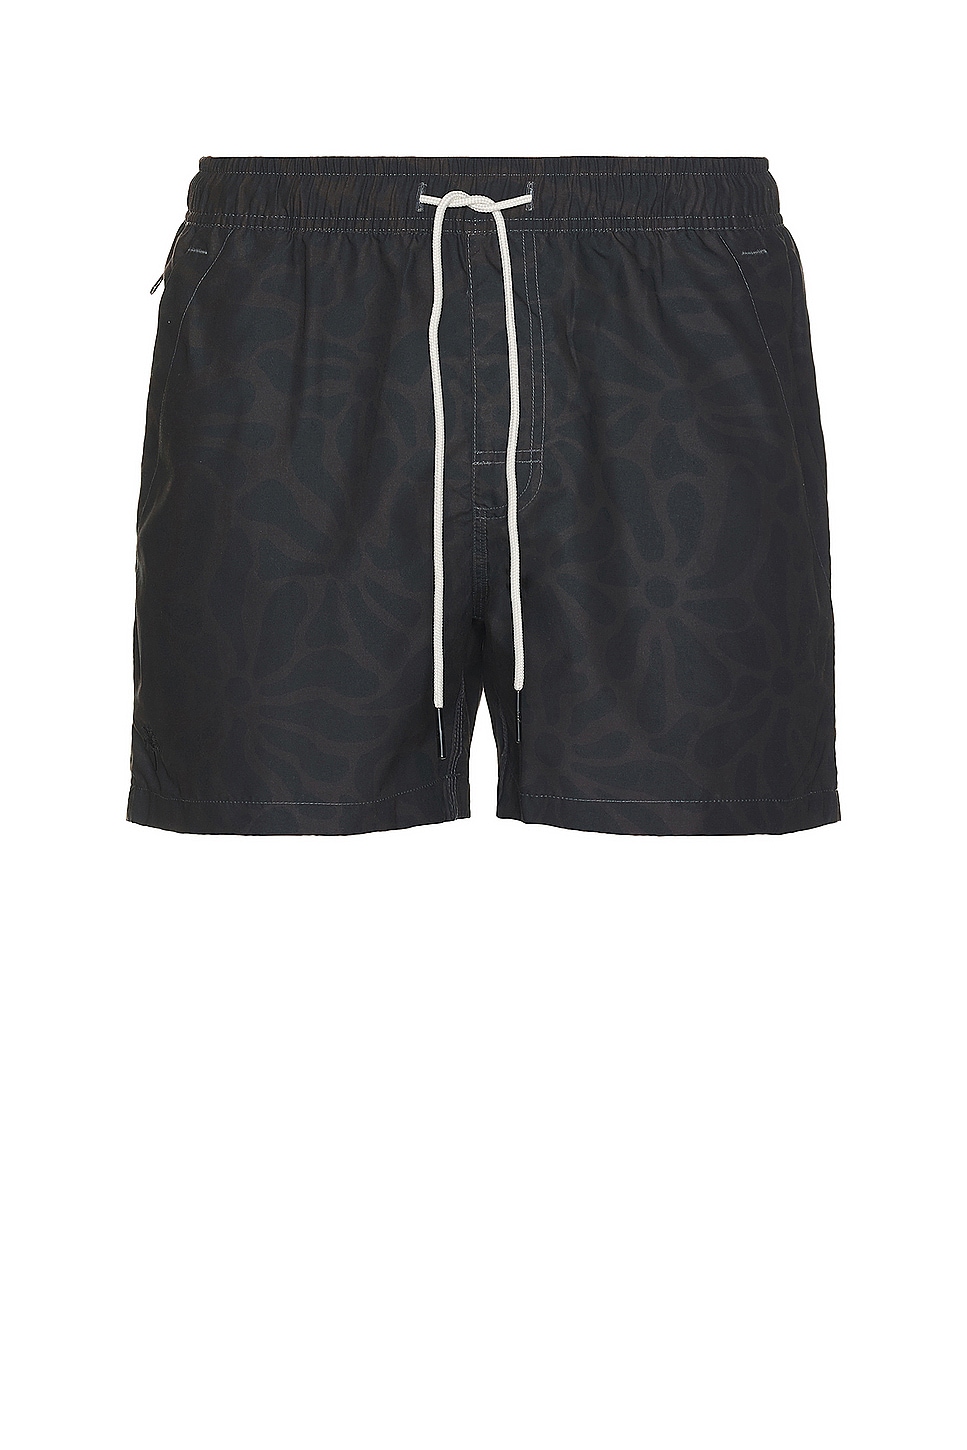 Image 1 of OAS Blossom Swim Shorts in brown